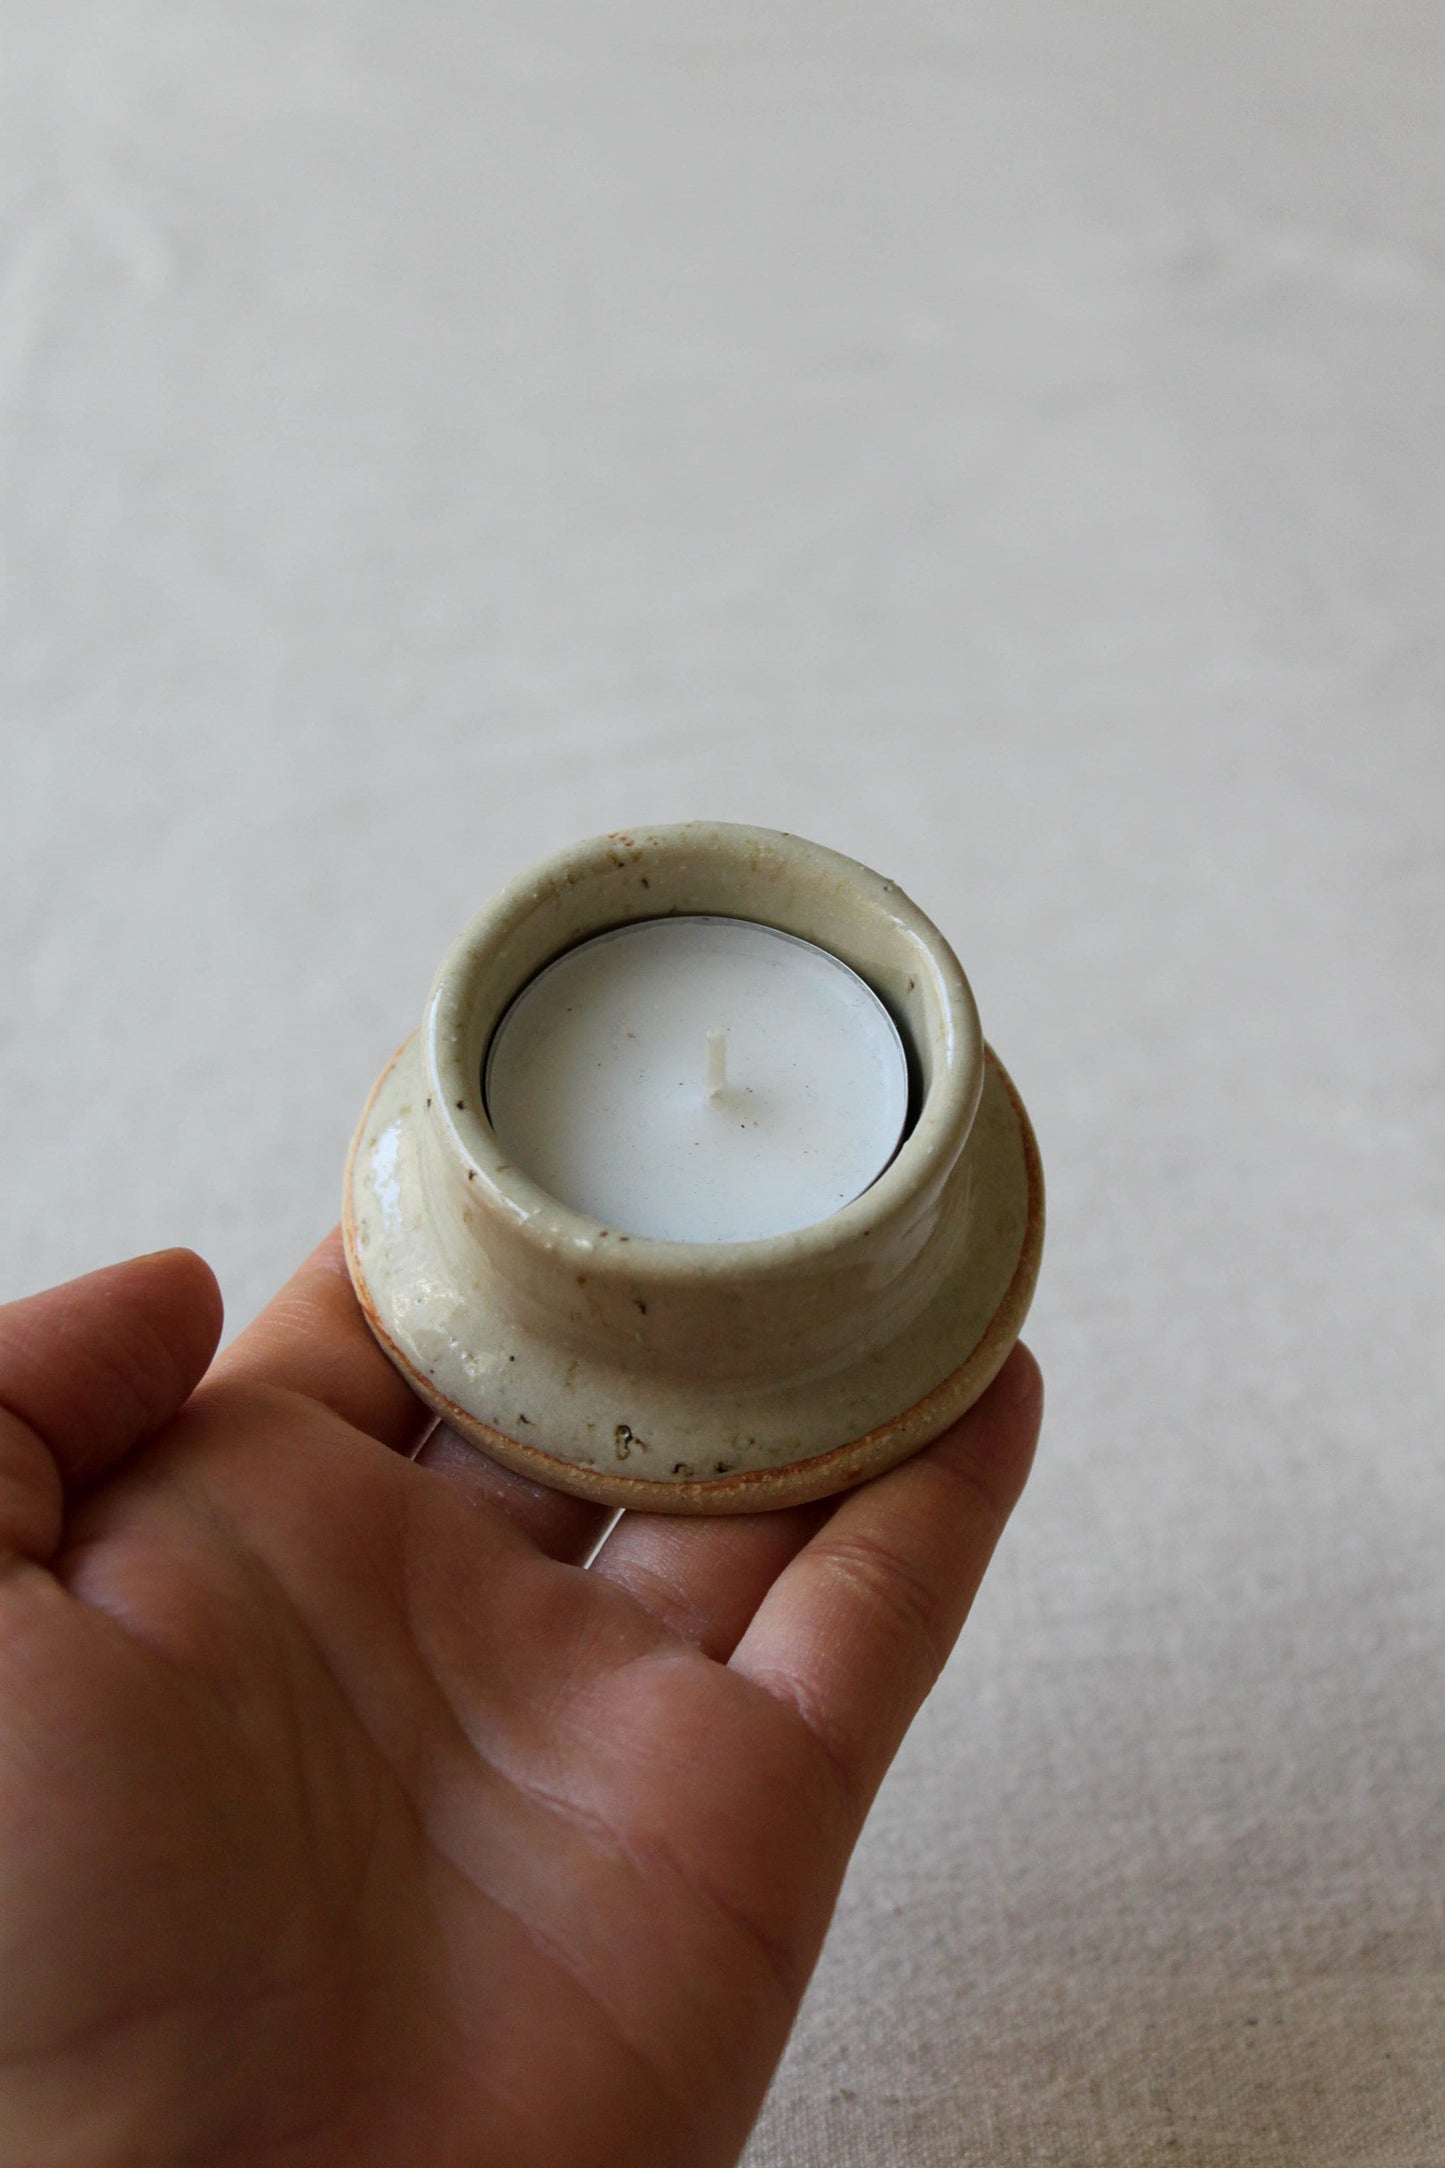 Special Edition Tealight Candle Holder in Speckled Beige